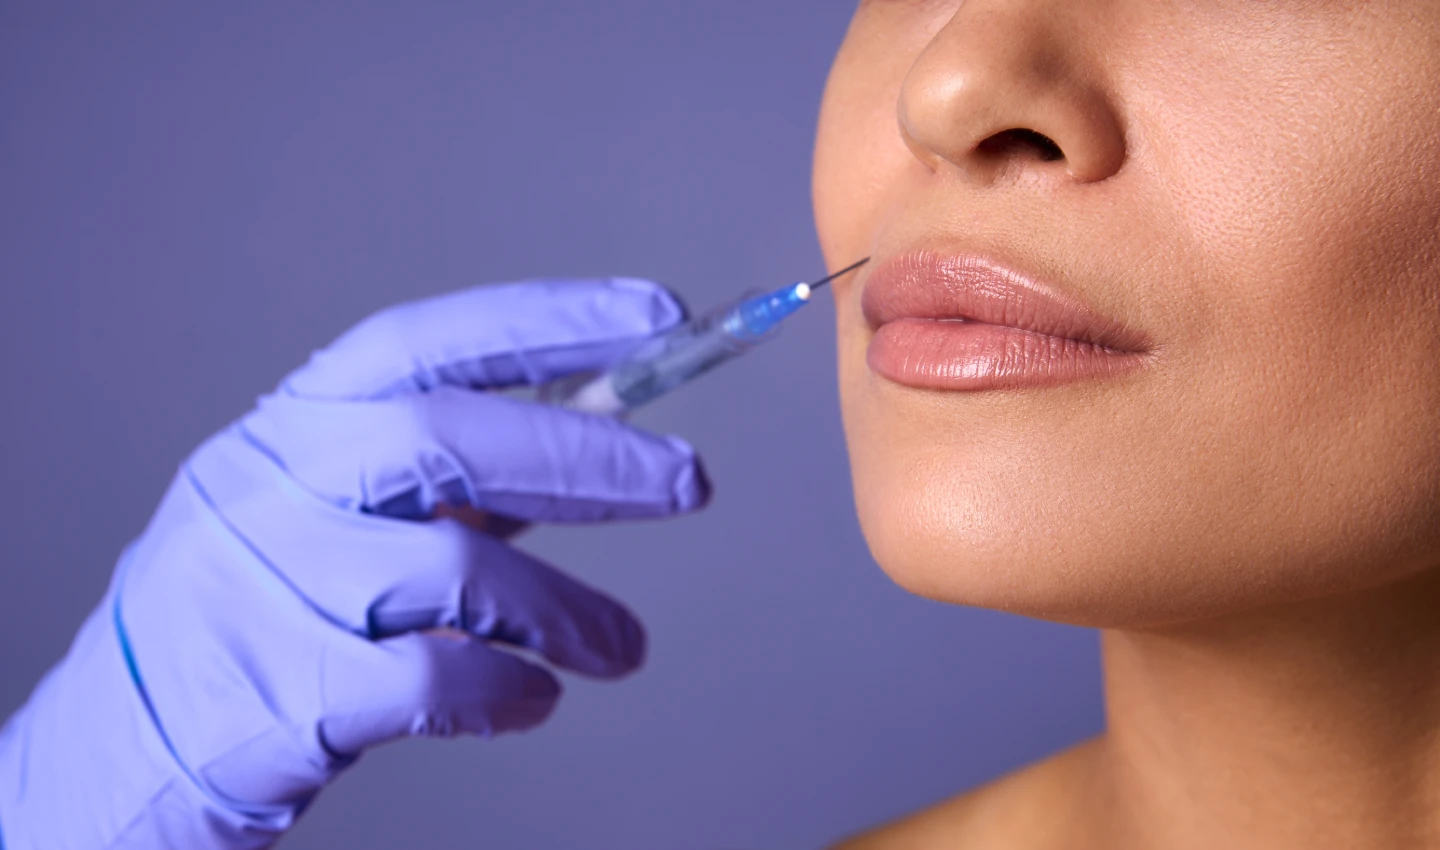 Woman receiving a lip augmentation injection with dermal fillers for plumper lips.